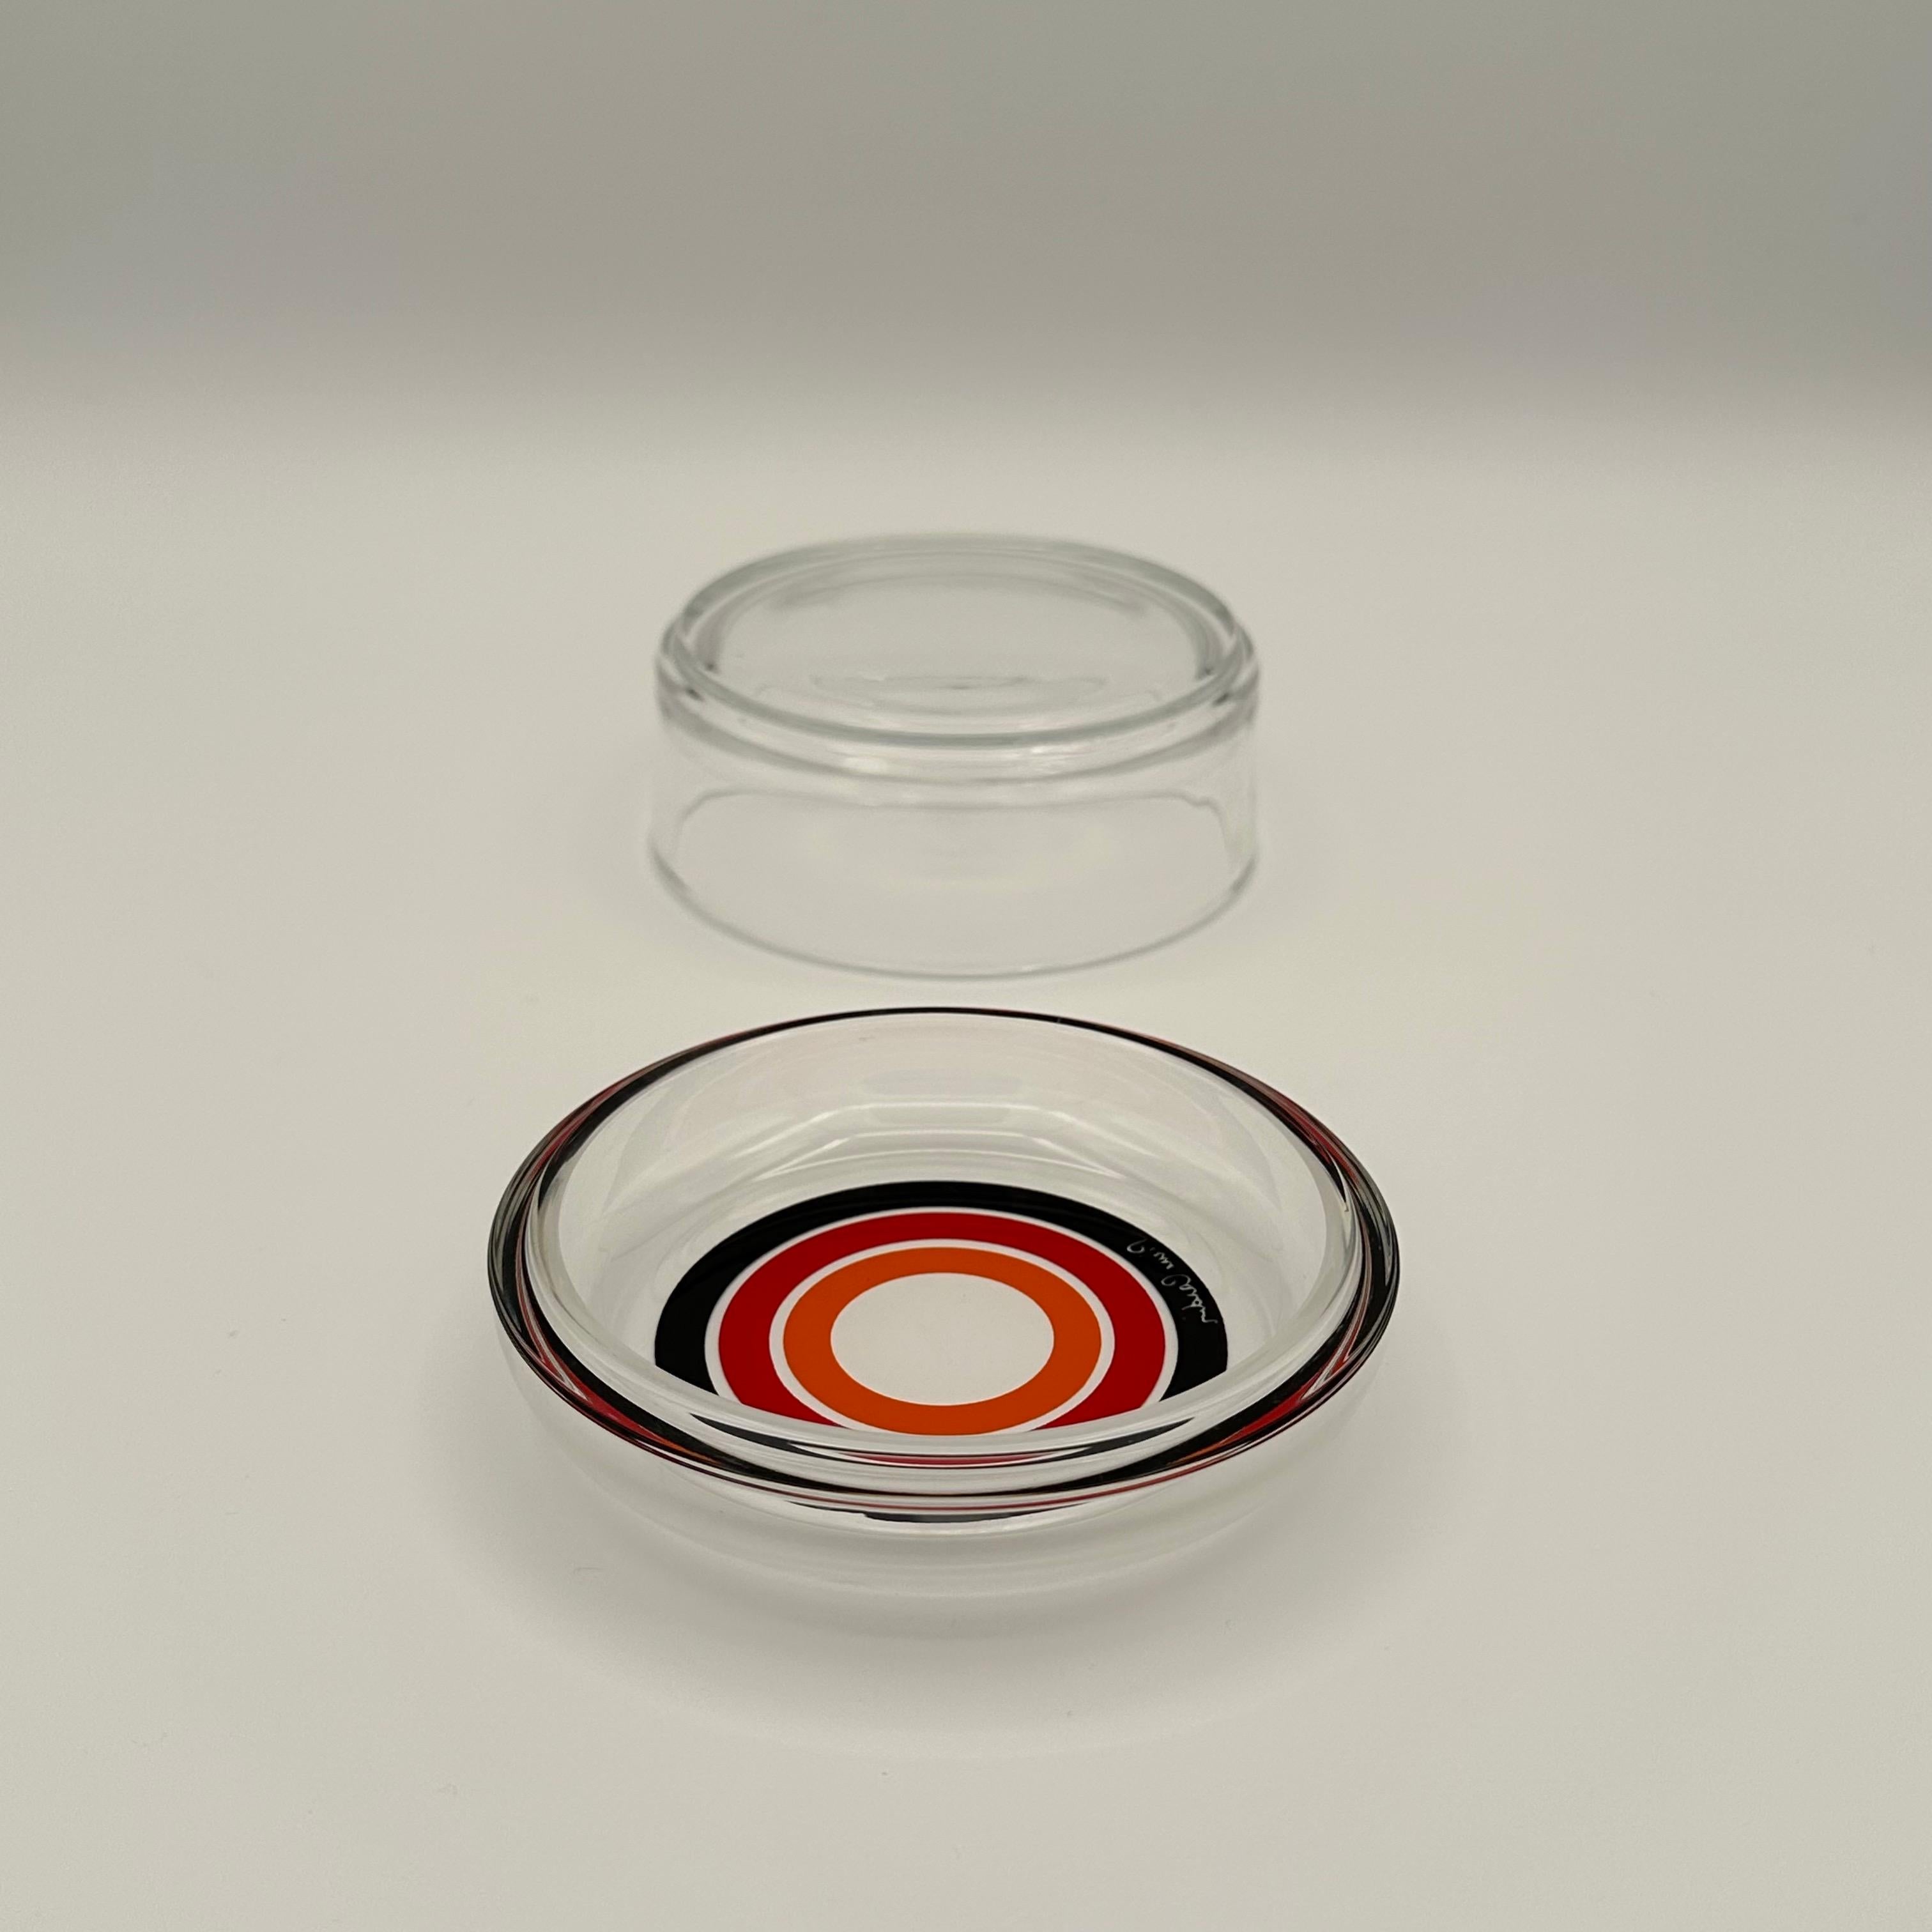 Late 20th Century Vintage Pierre Cardin for Sasaki Lidded Glass Bowl in Red, Orange and Black For Sale